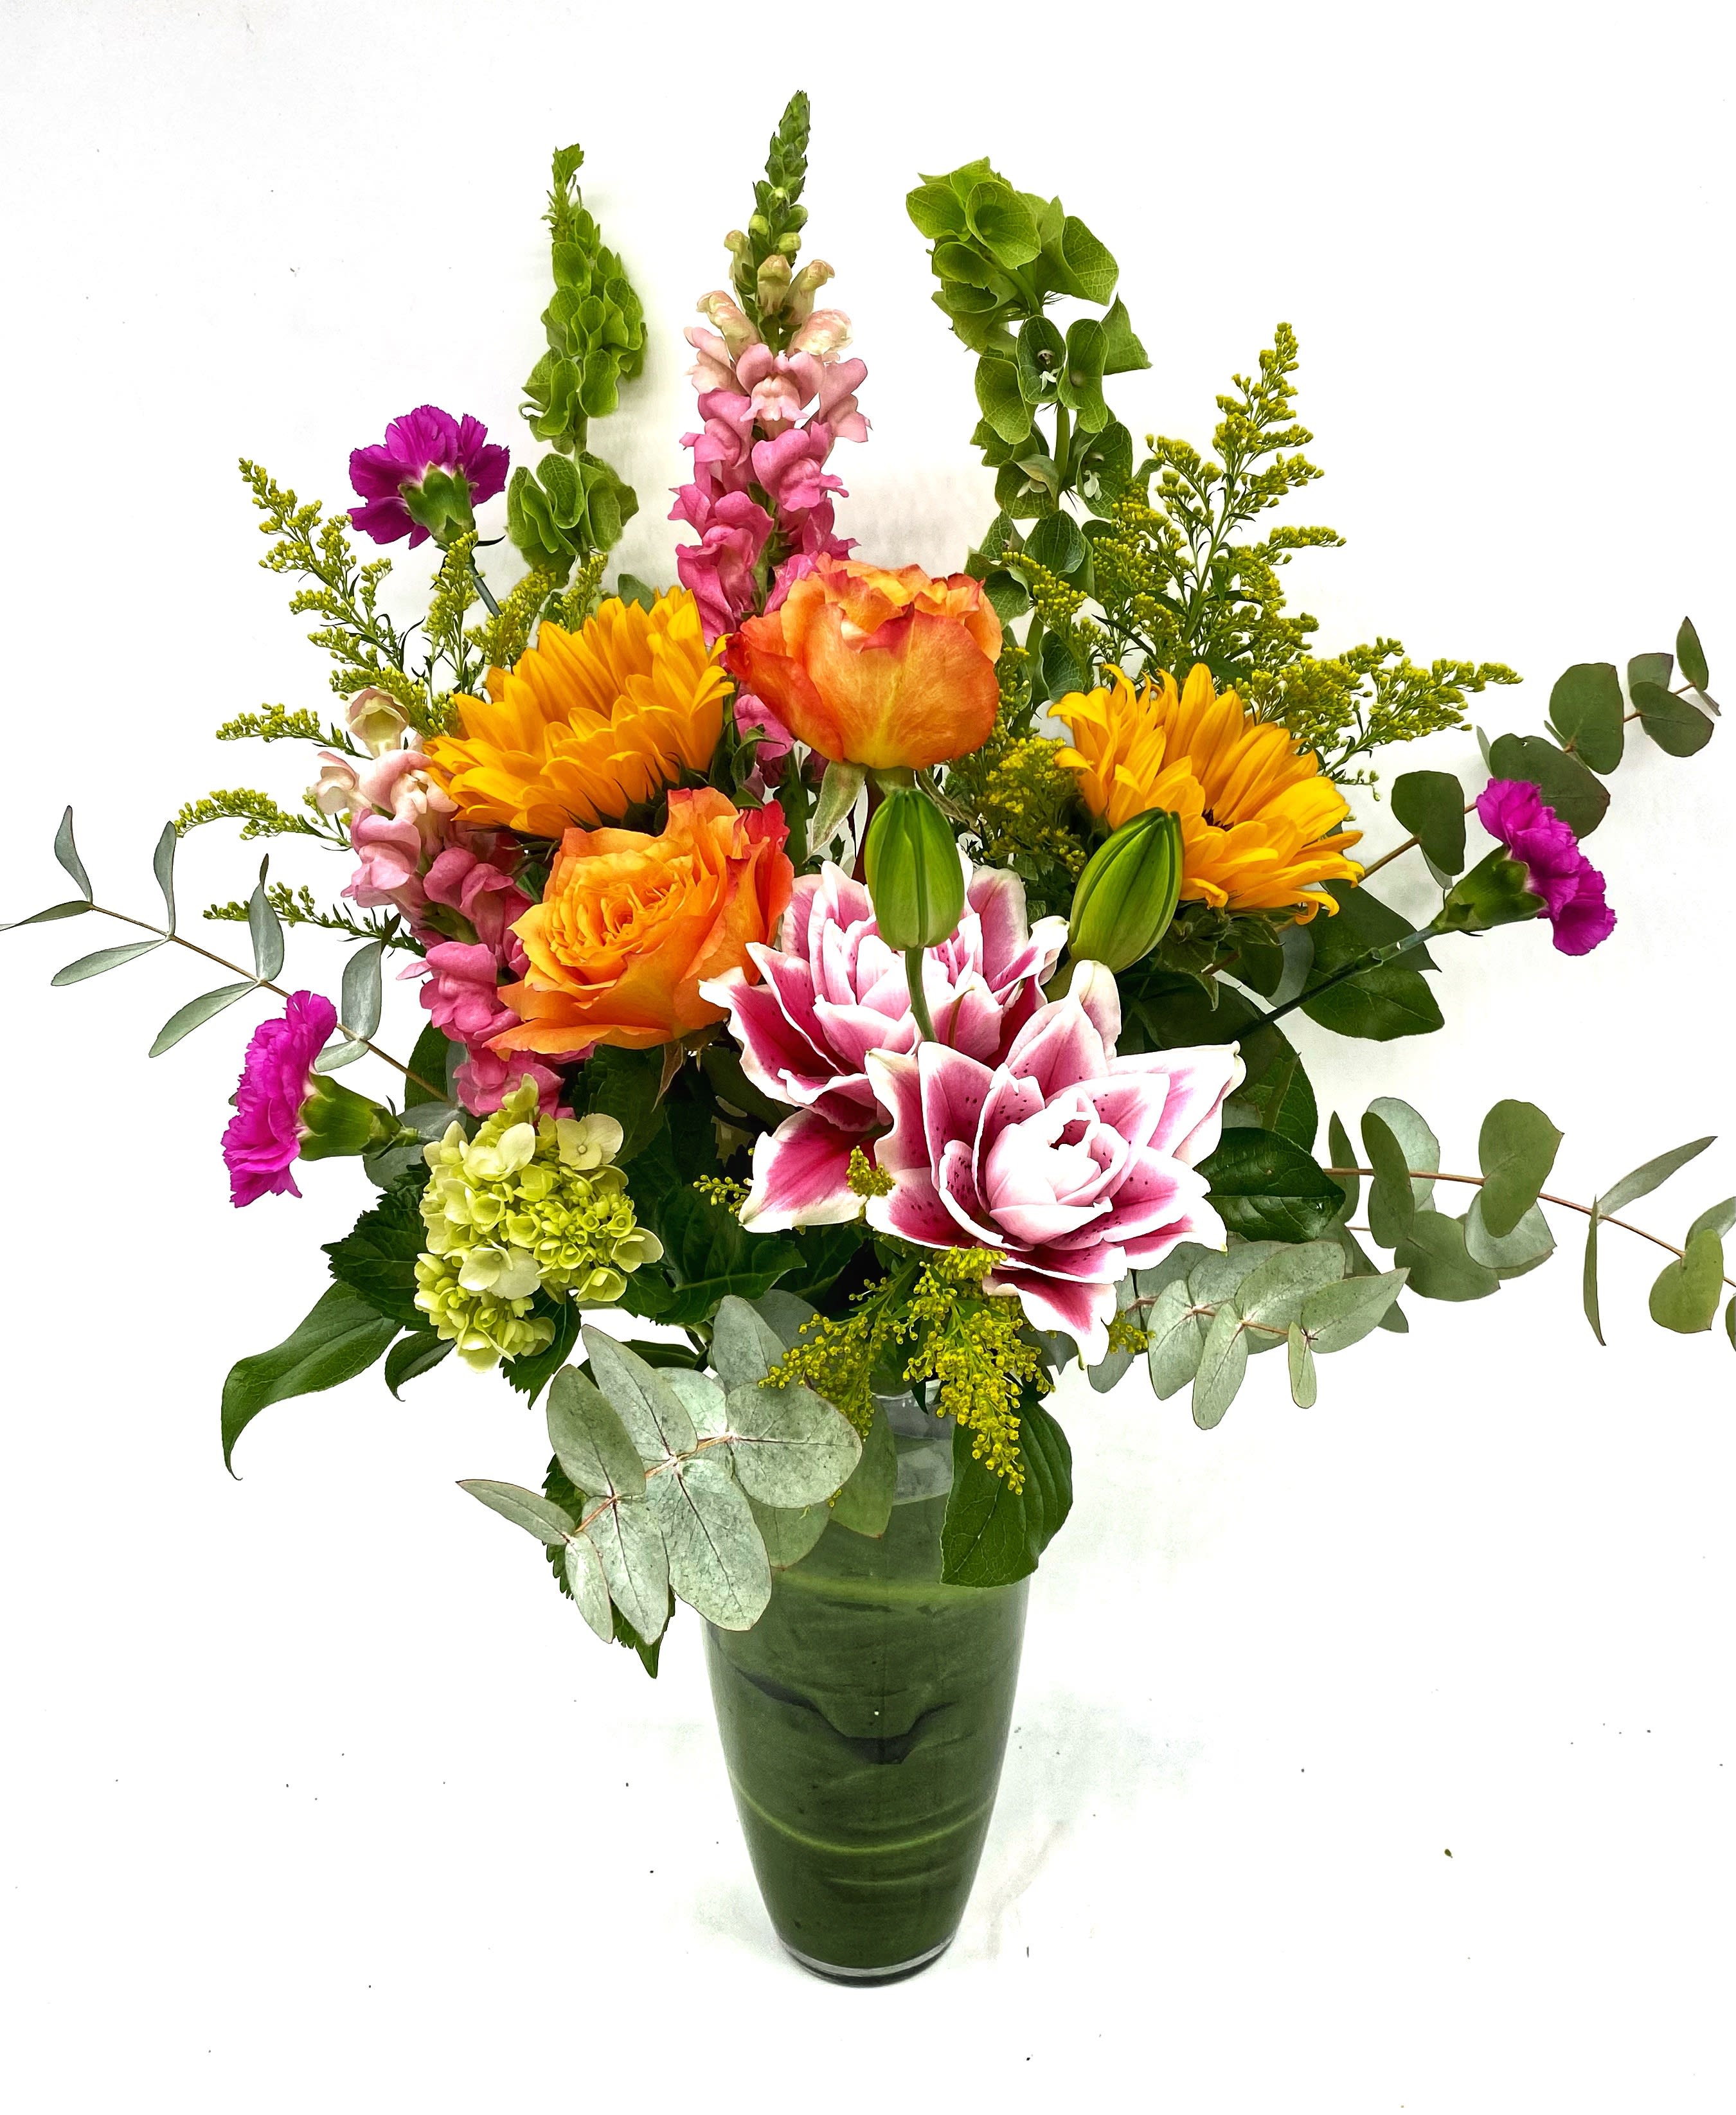 Bright Bounty  - This tall and upright vase of summer blooms is sure to impress. Featuring Oriental Lilies, Roses, Snap Dragons, Bells of Ireland and Solidago blooms makes for a bright array 